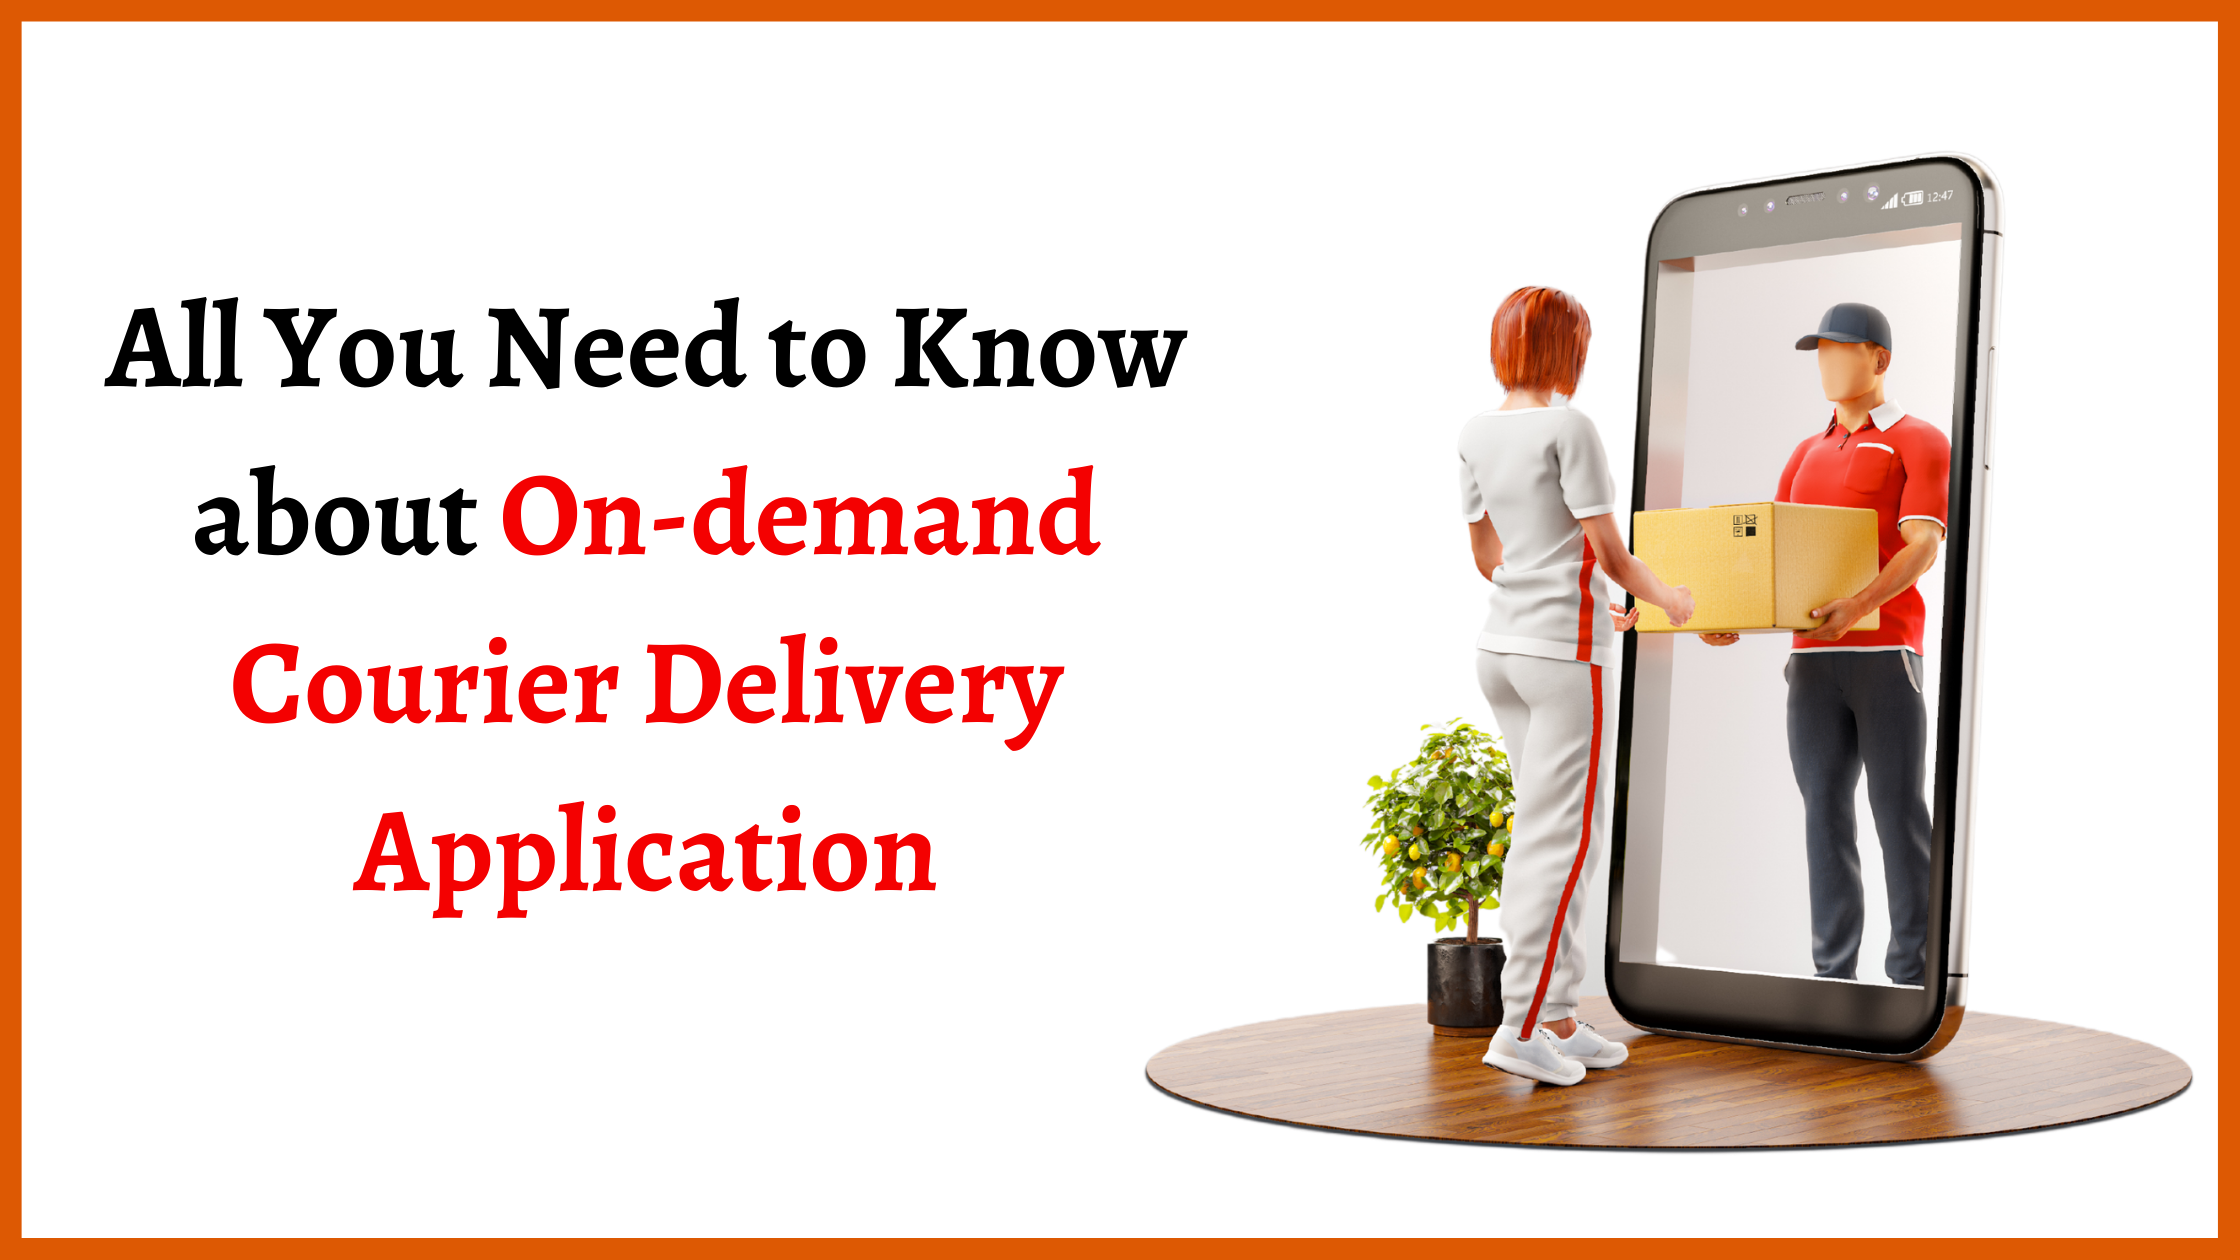 All You Need to Know about On-demand Courier Delivery-Application